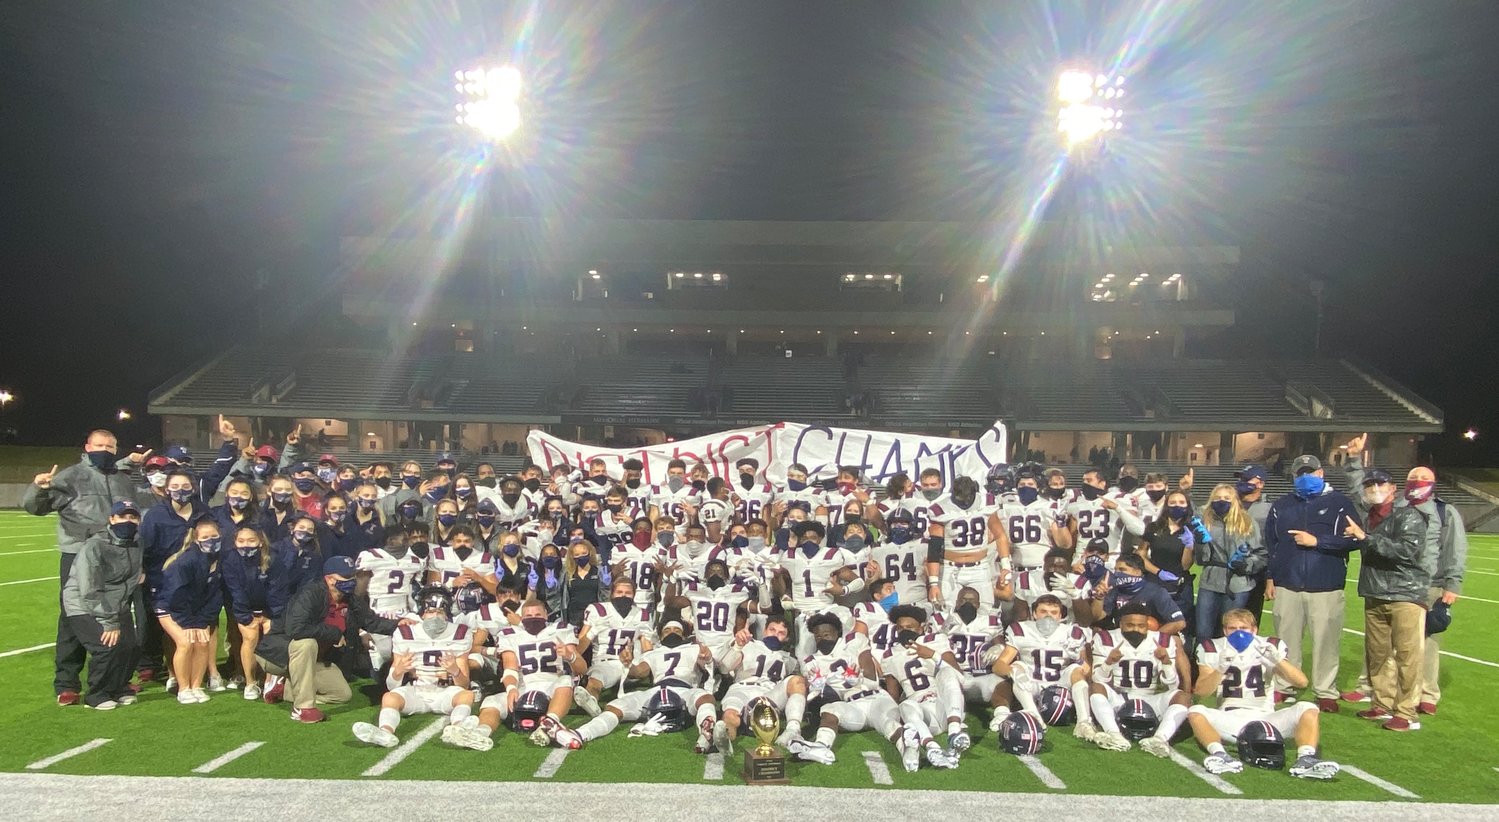 Tompkins football coaches, players and support staff celebrate and pose for a photo following their win over Seven Lakes on Nov. 27.